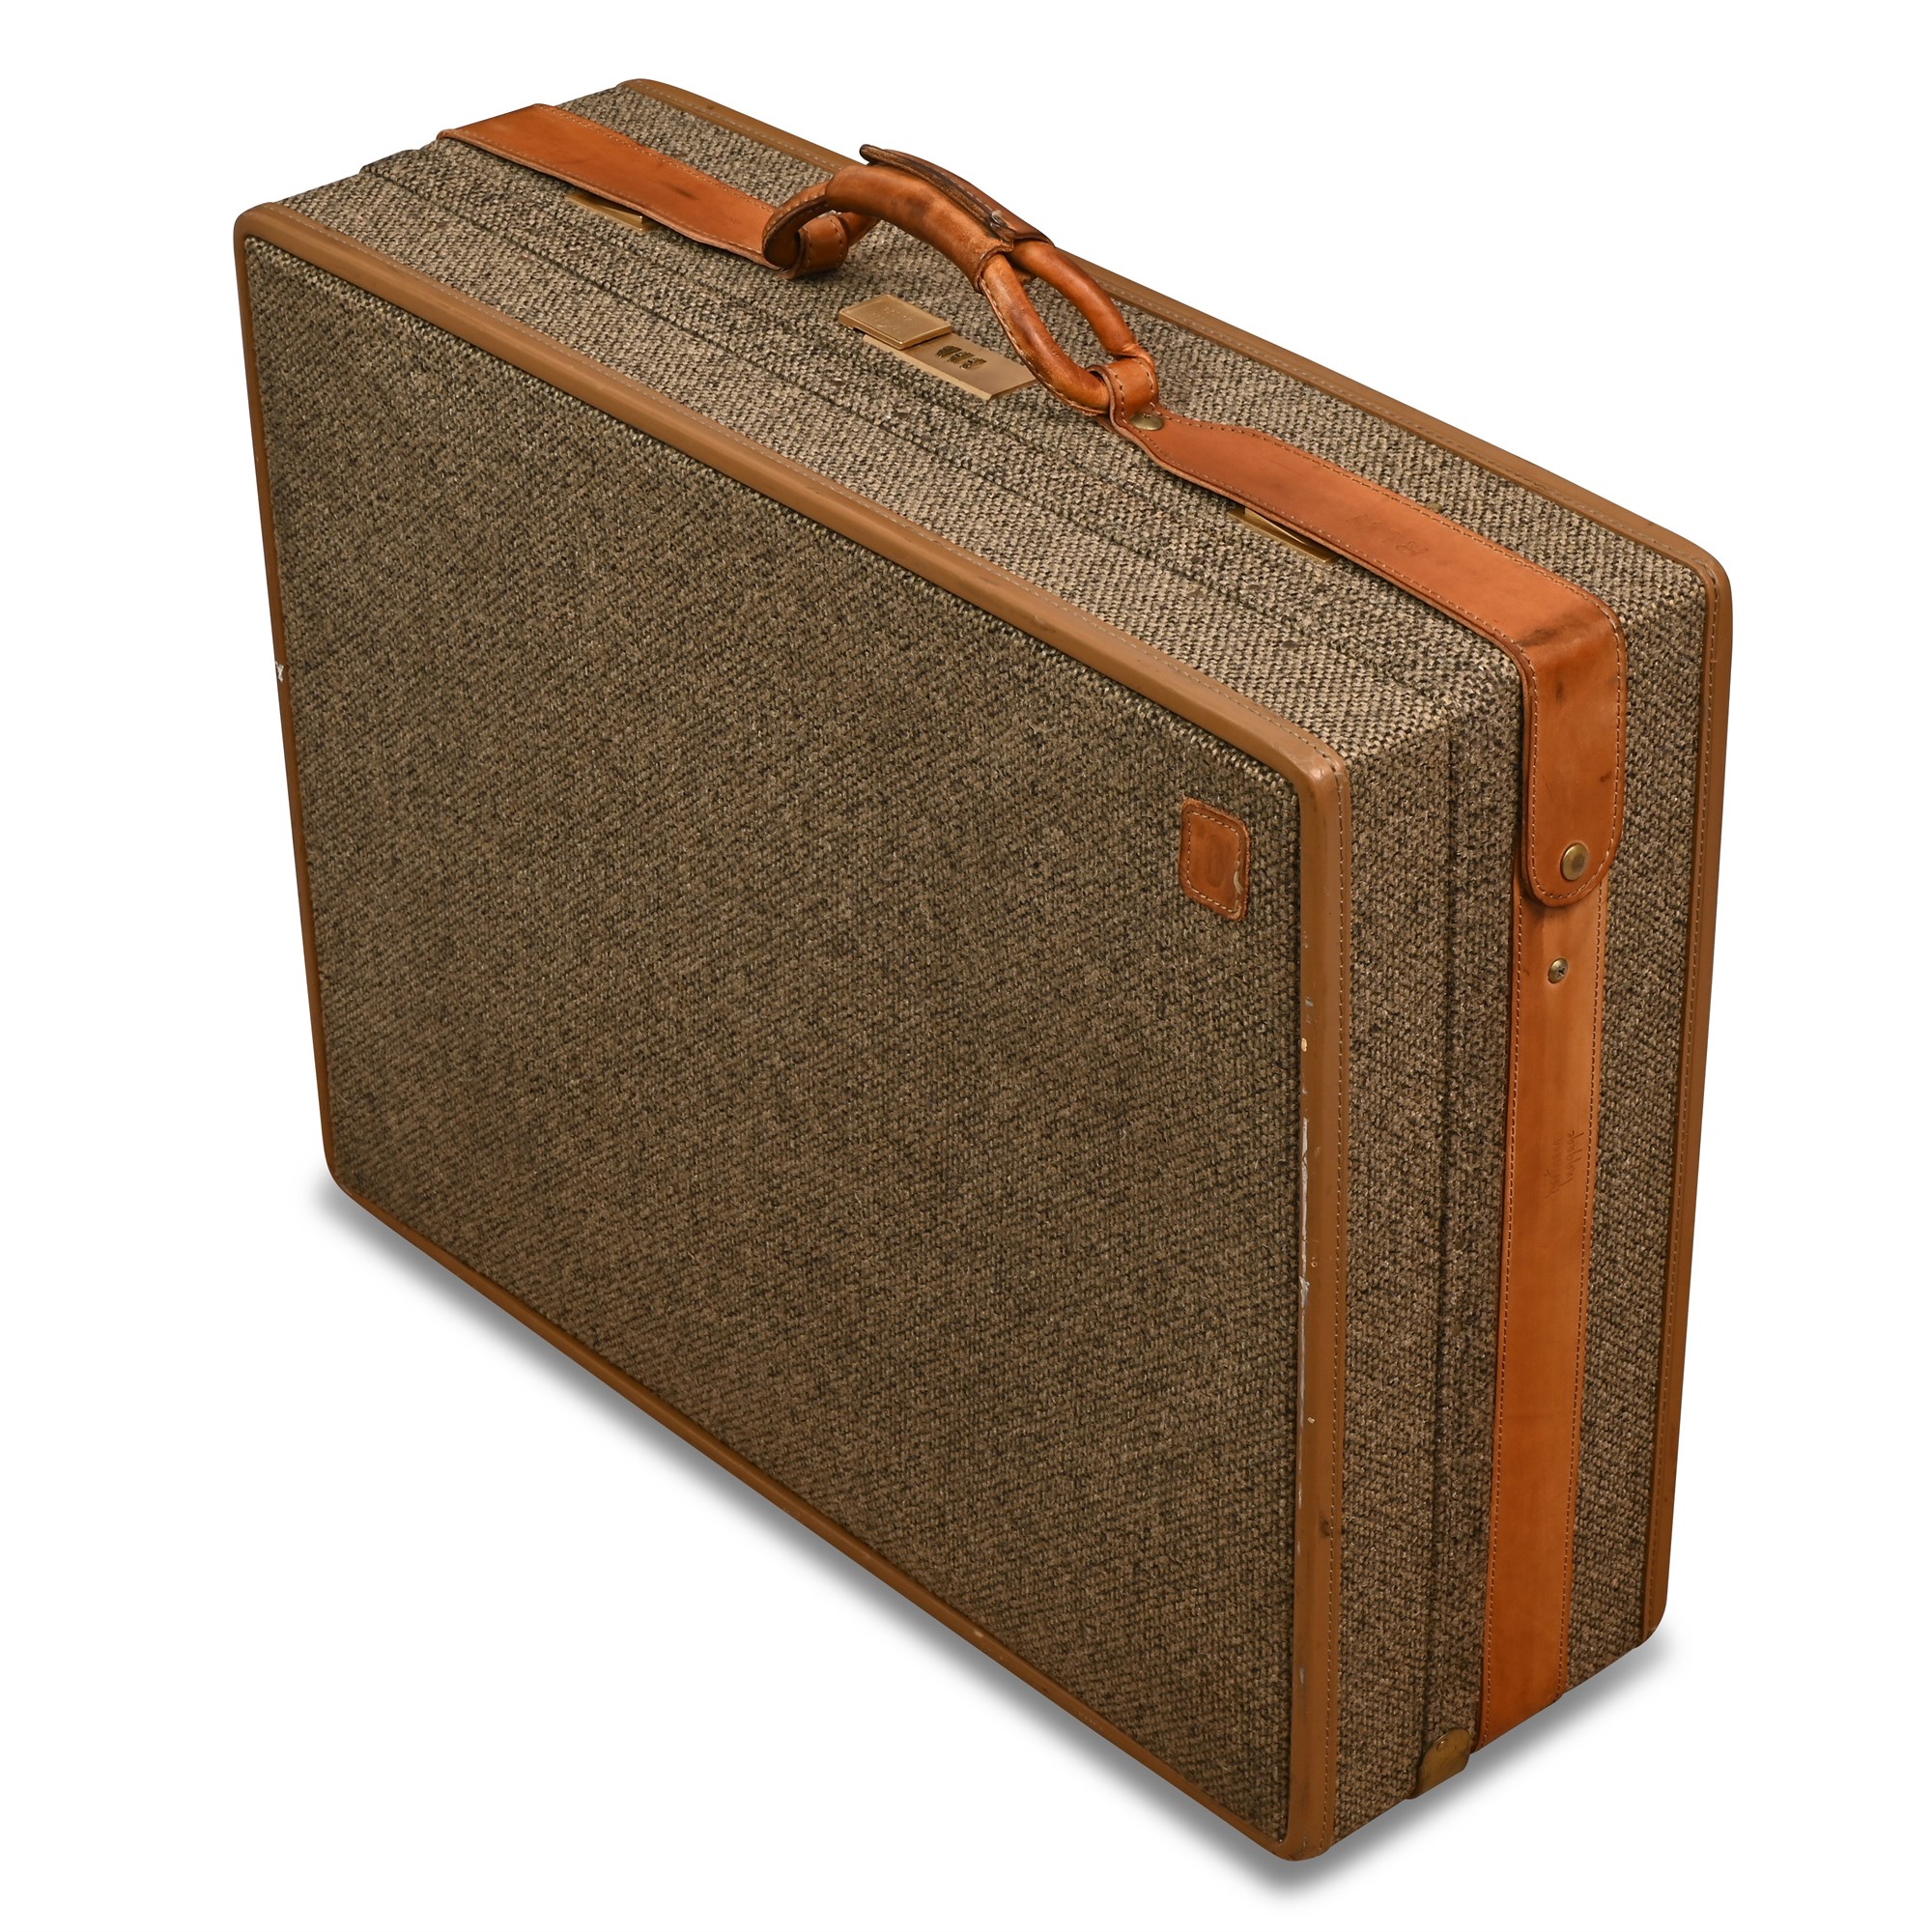 Sold at Auction: Vintage Hartmann Luggage Suitcase